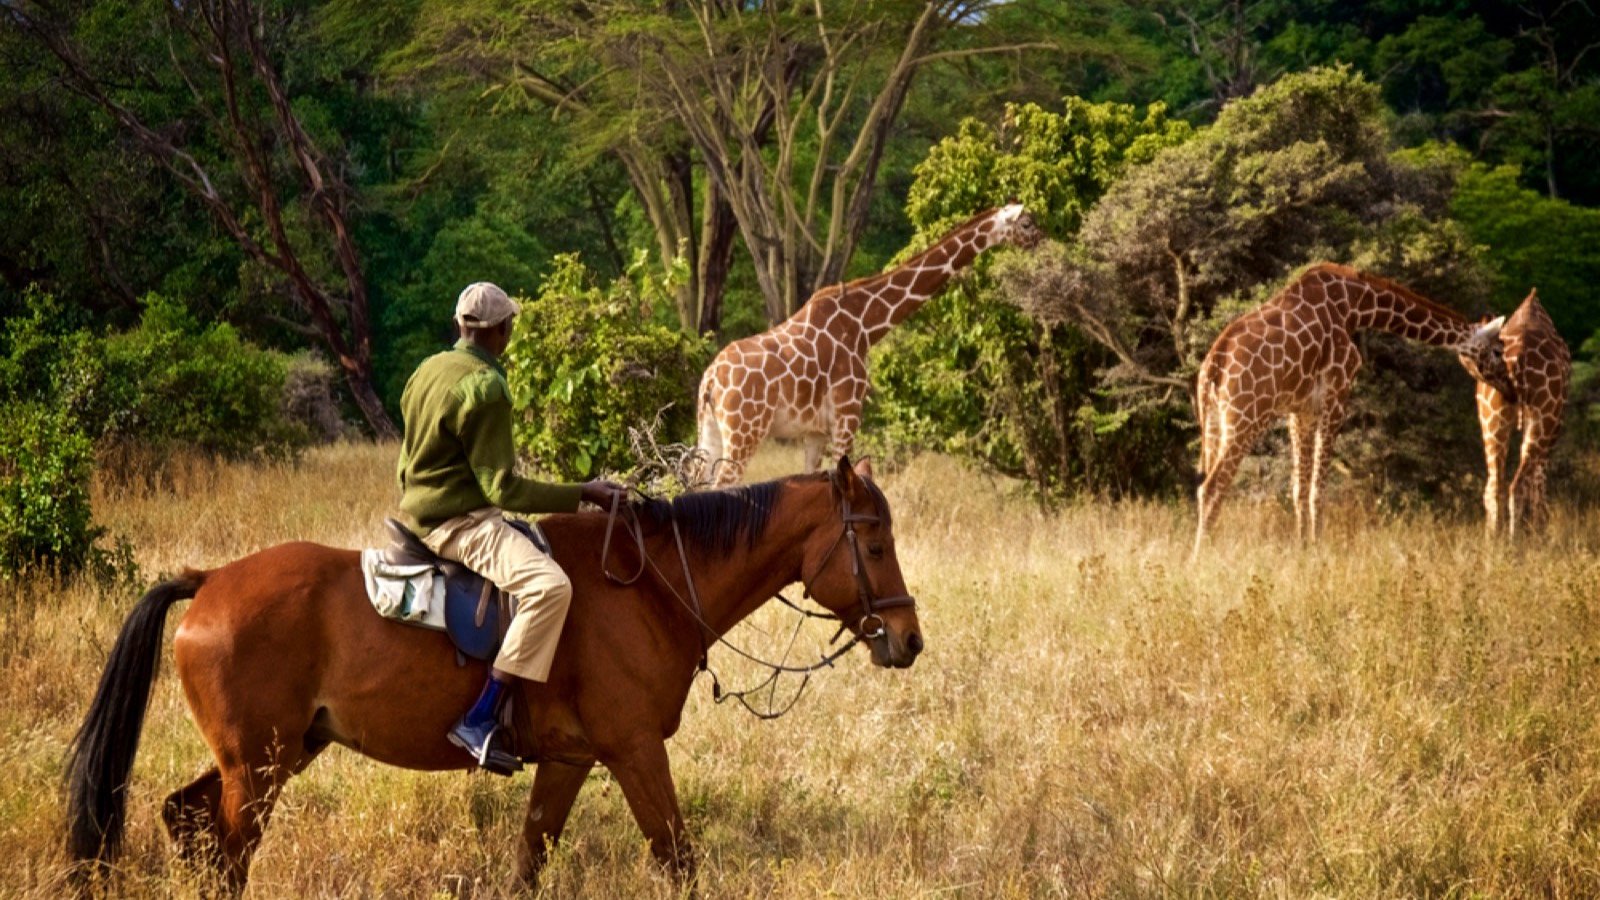 <p>If you want to get close to wildlife, riding a surefooted horse across the plains is the way to go. You can see enormous herds of zebra, giraffe, wildebeest, and more. Because horses are prey animals, you can get closer to South Africa’s wildlife, as horses are not a threat to them.</p><p>Your horseback safari may last a few hours or days and can vary from “roughing it” to luxury mobile camping experiences.</p>